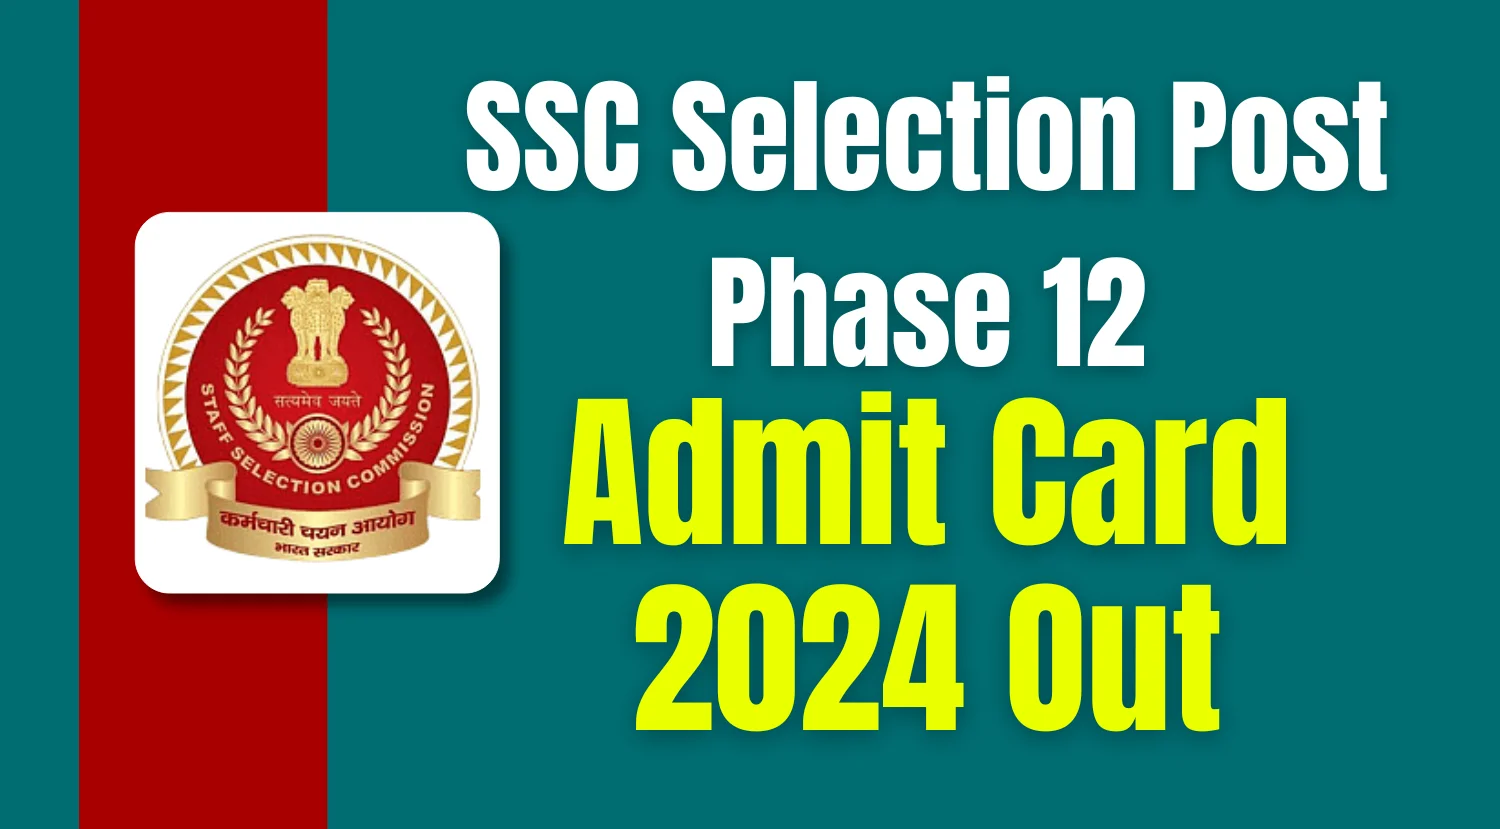 SSC Selection Post Phase 12 Admit Card 2024 Out, Download Hall Ticket From Here Now